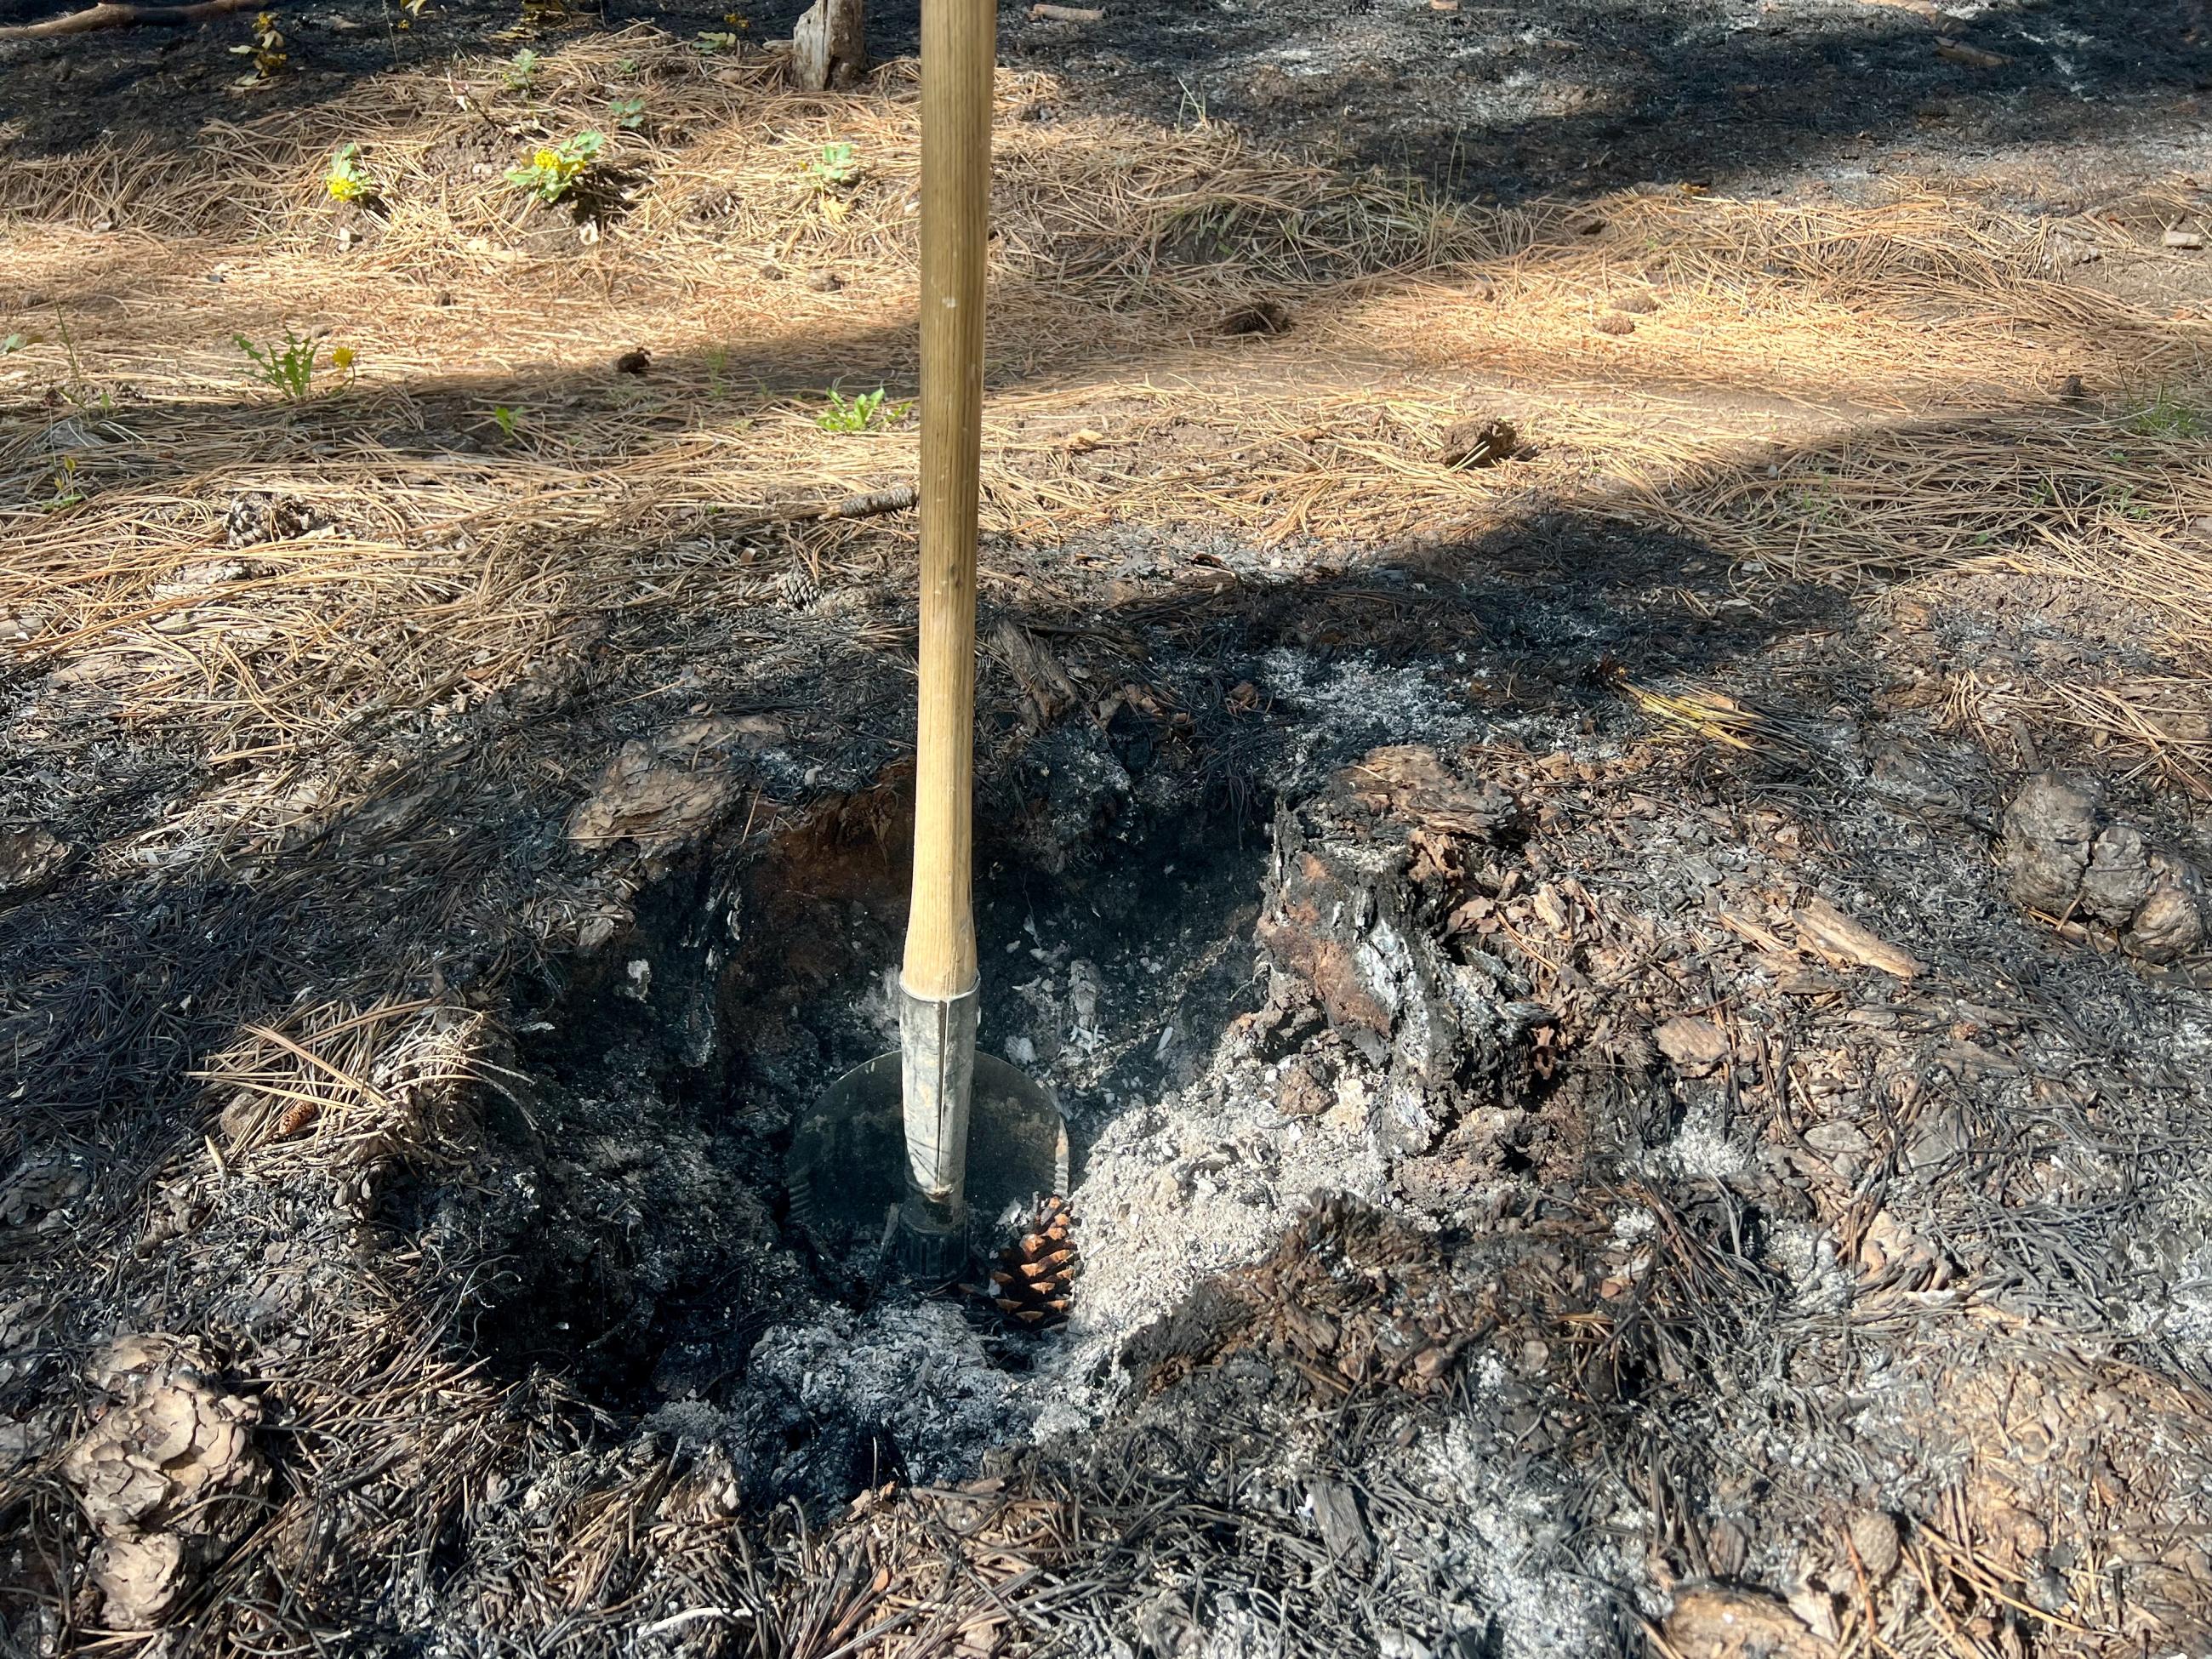 A firefighting tool is shown inside a stump hole left after a prescribed fire.